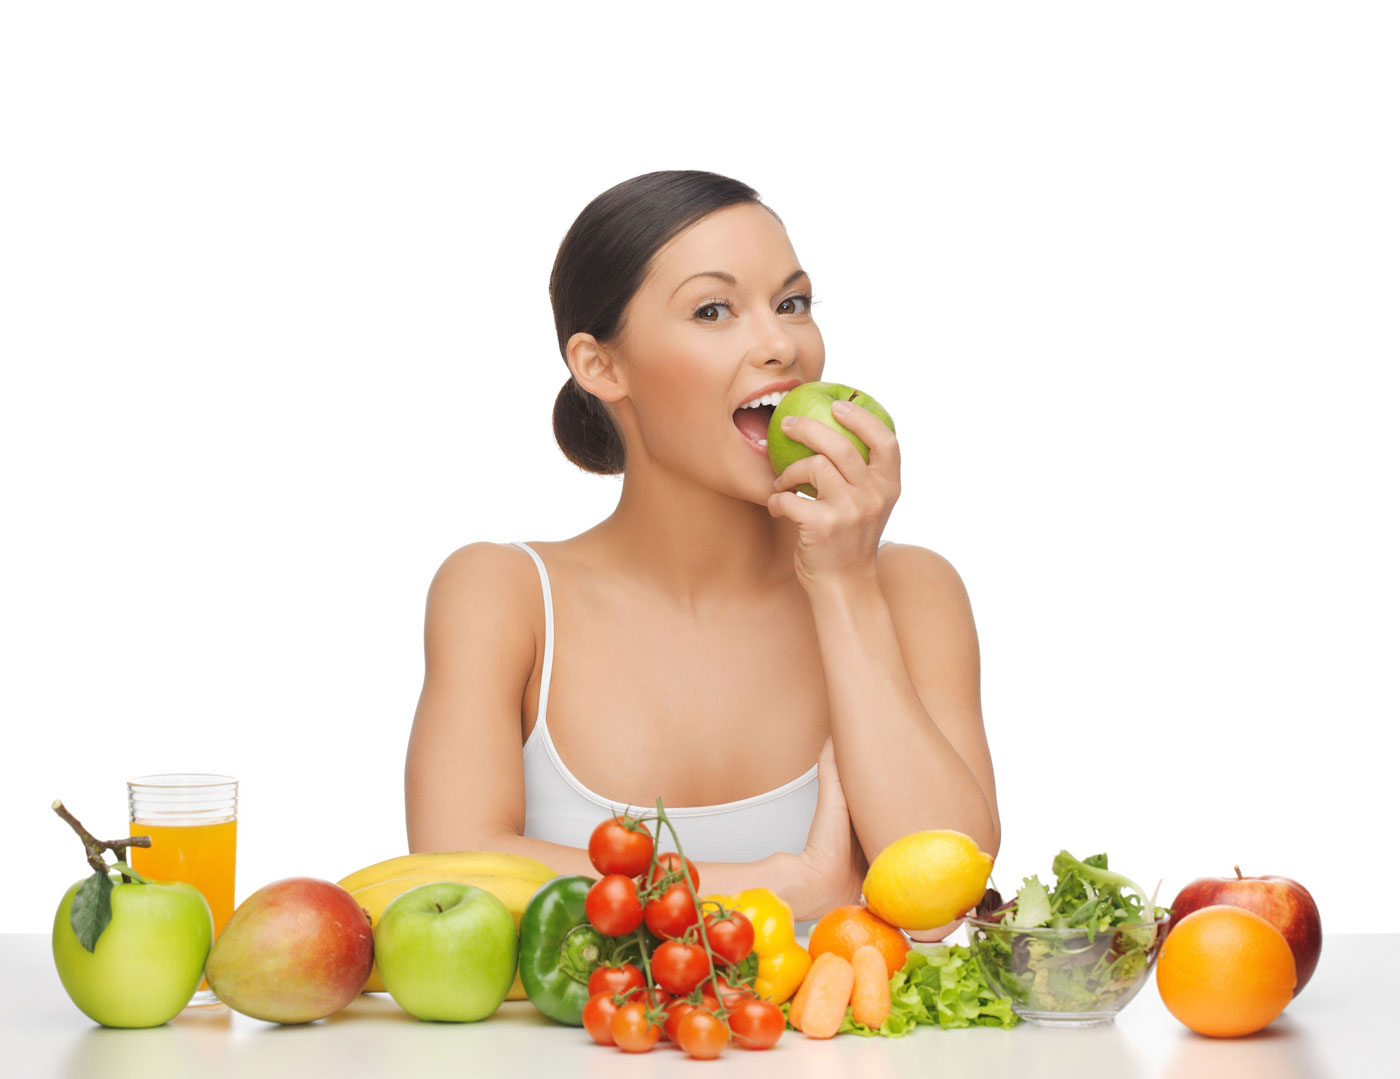 a woman eating an apple with fruits and vegetables in front of her.